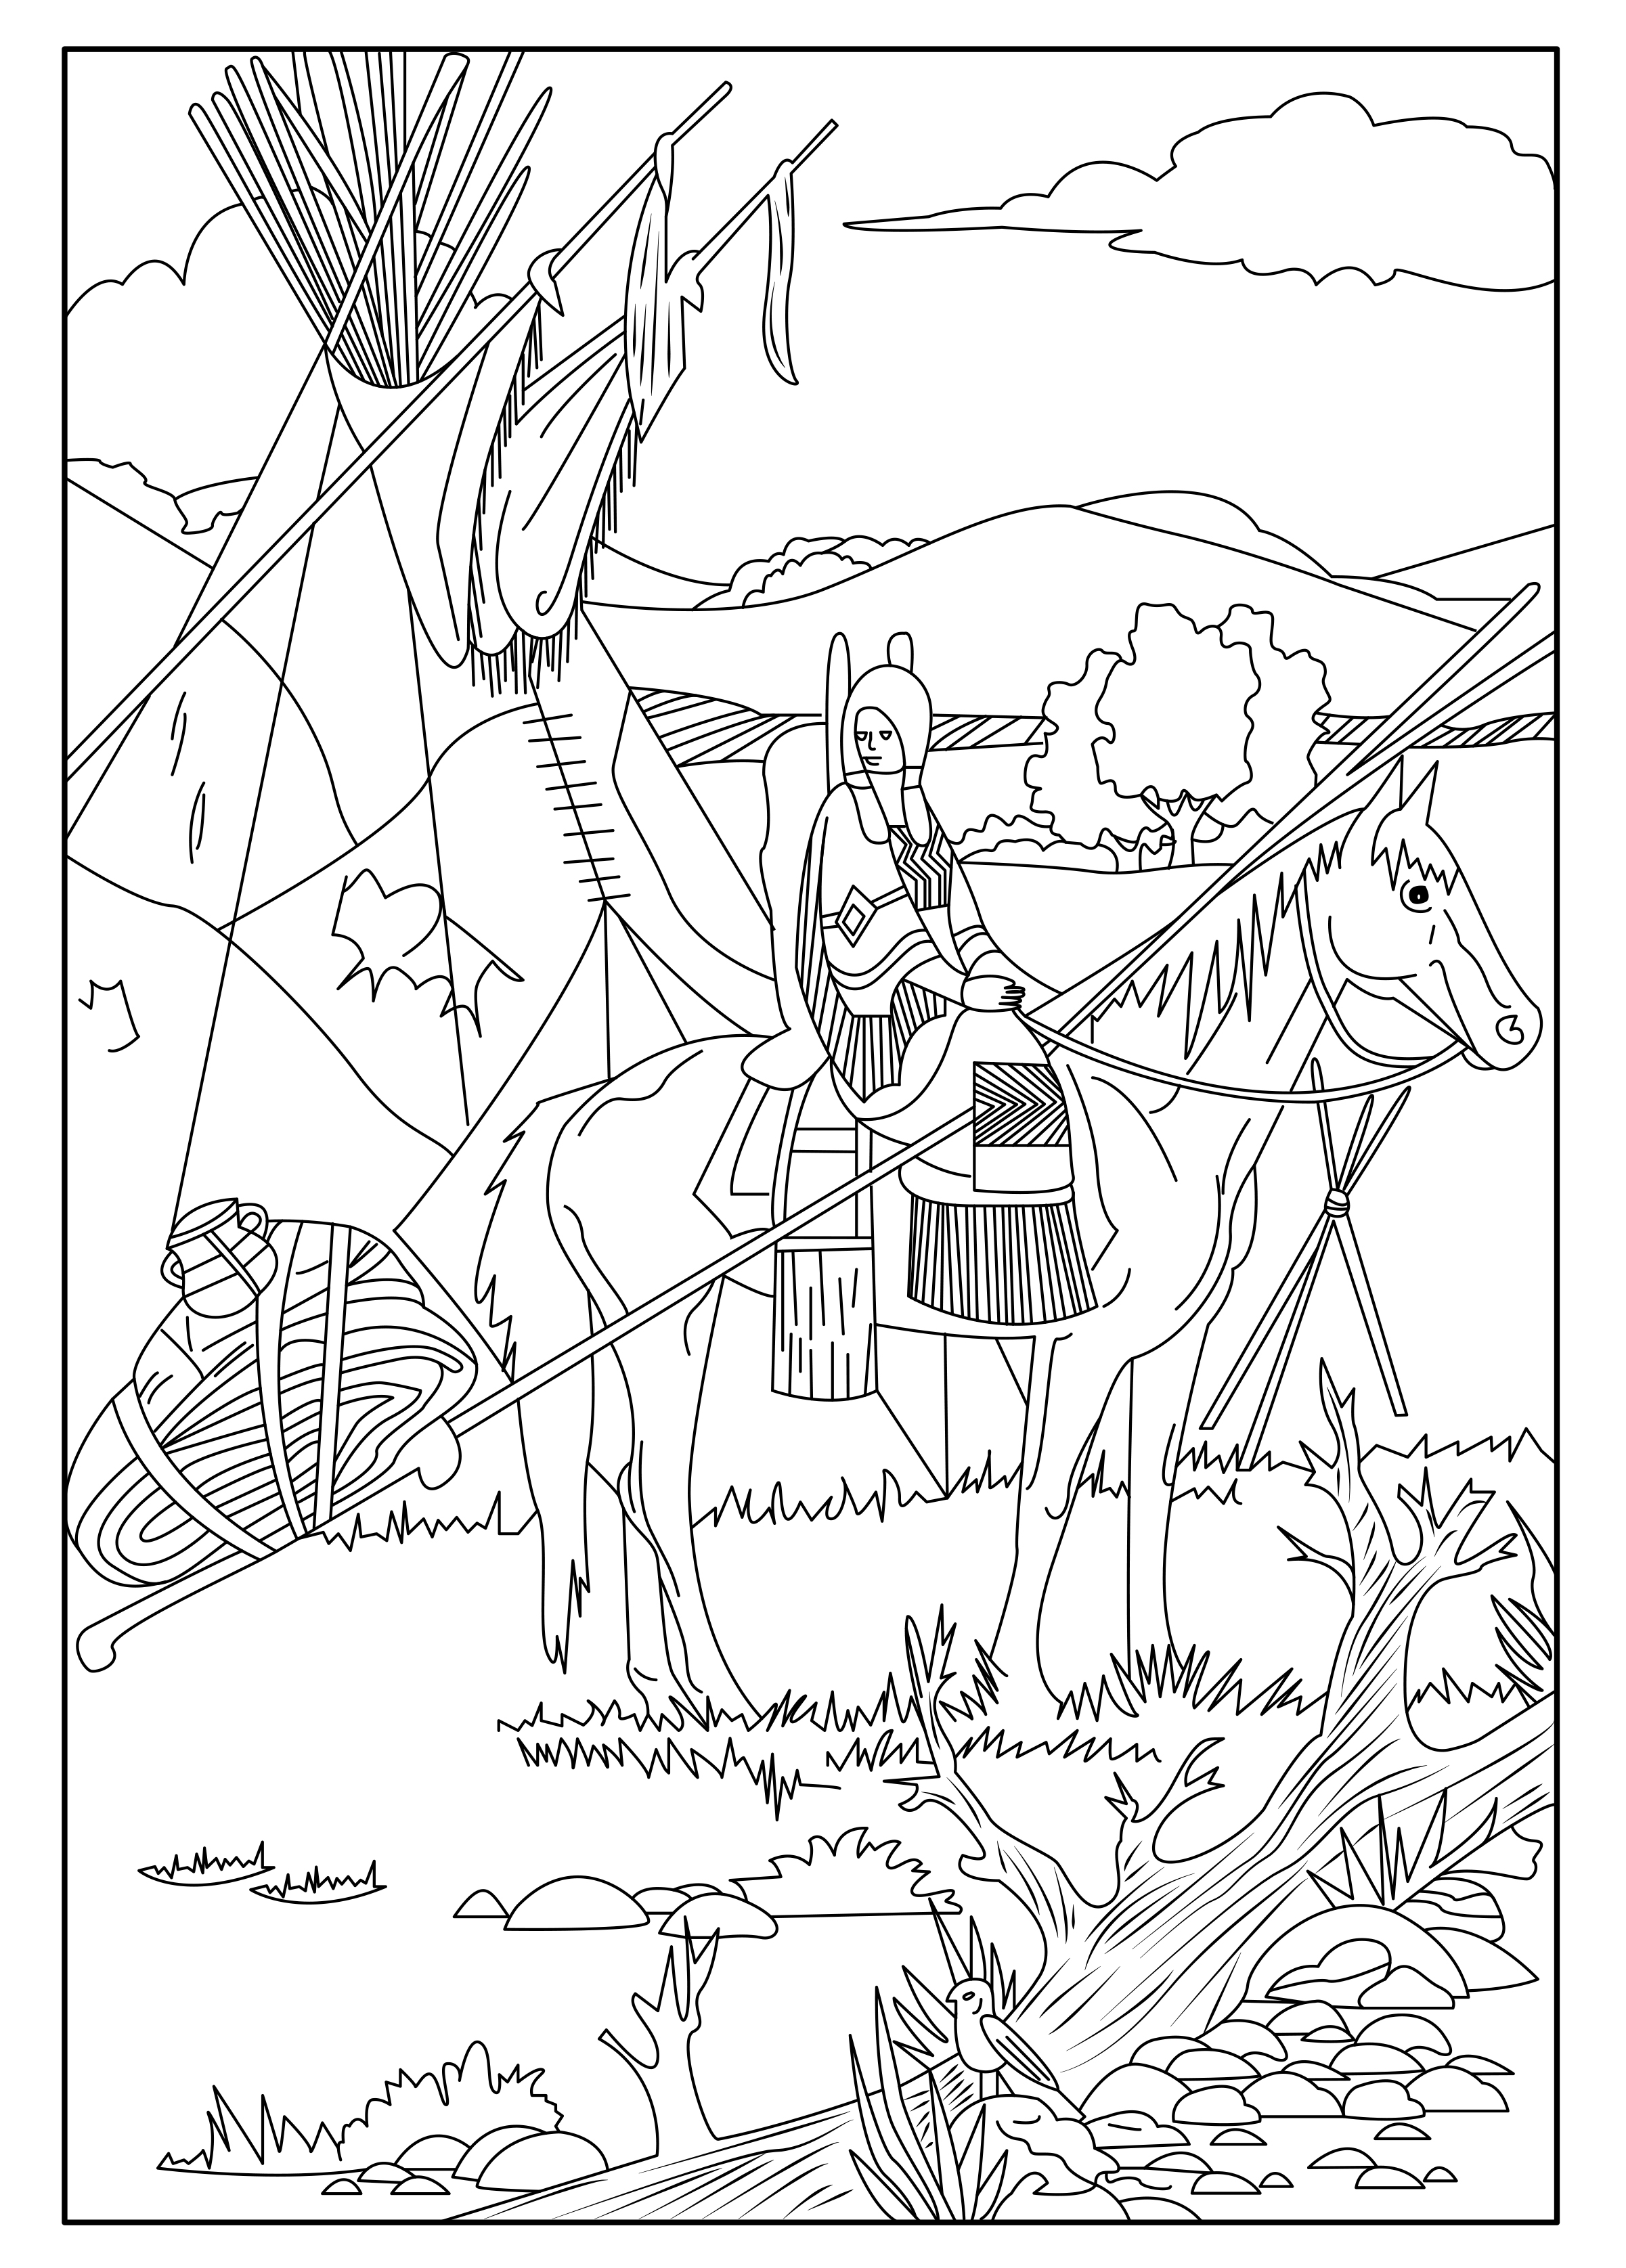 Free Native American Indian Coloring Pages